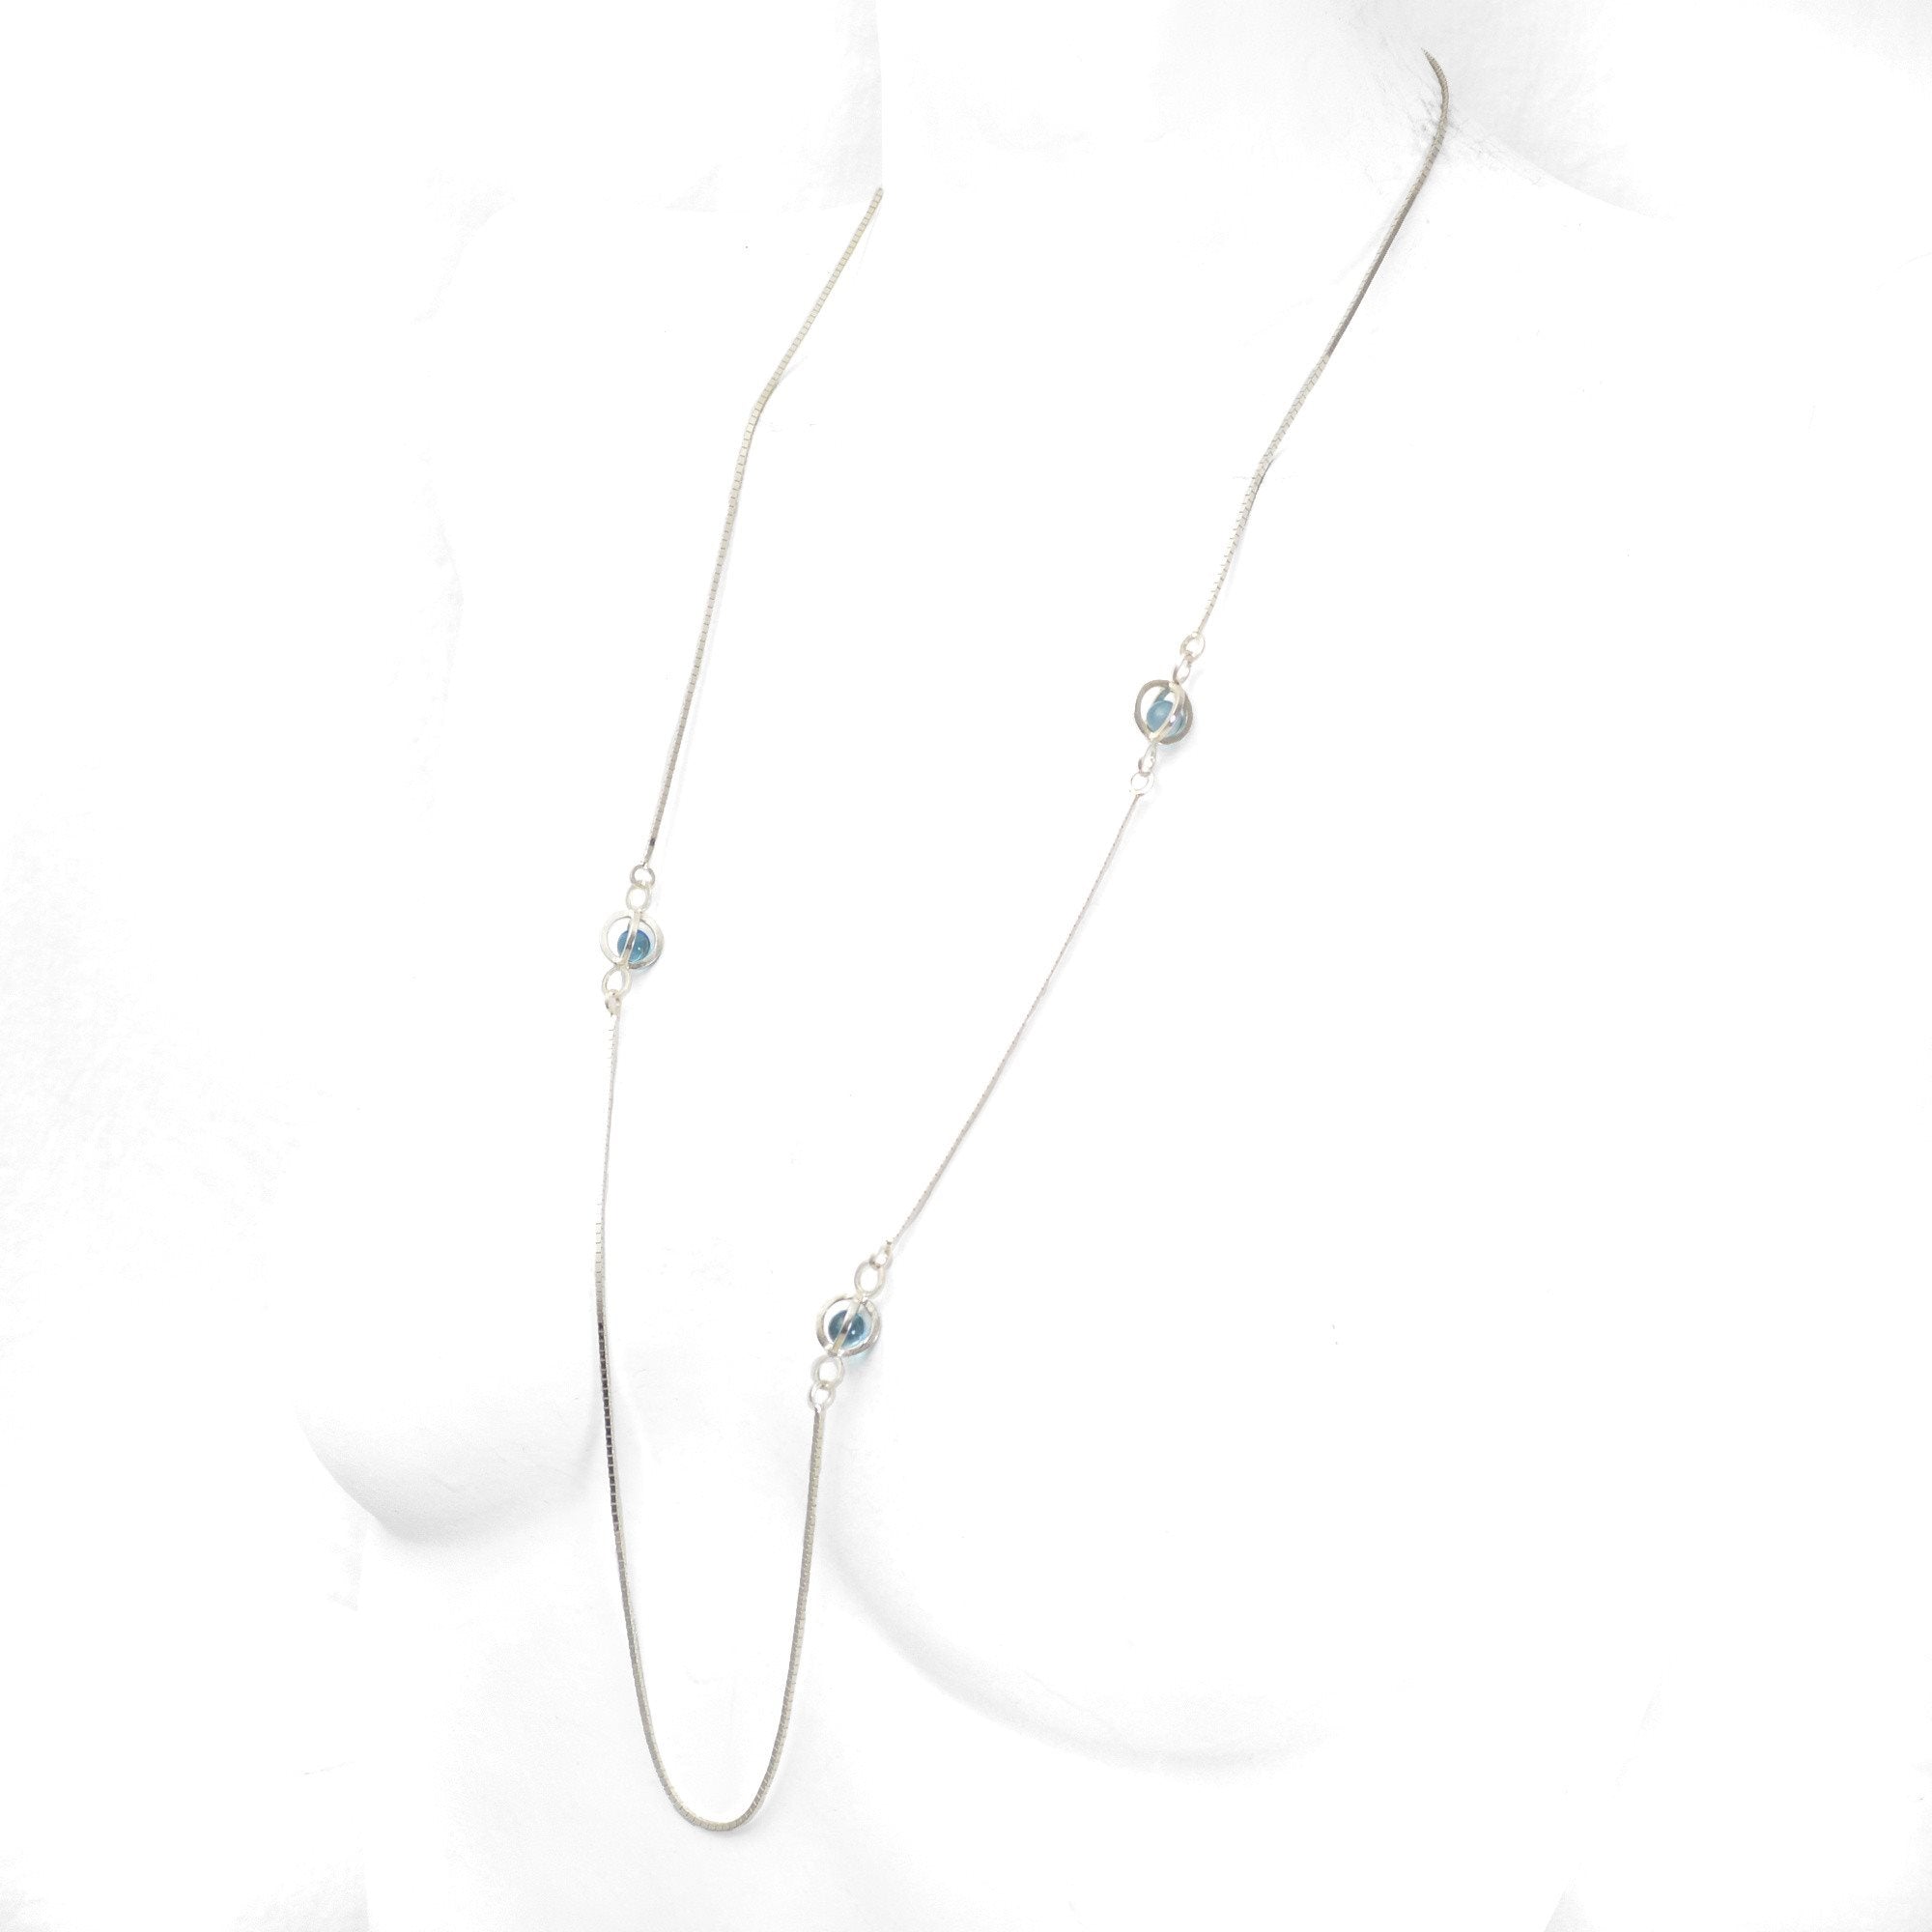 Earth Ocean Air Long Necklace in Sterling Silver, Blue Aura Crystal